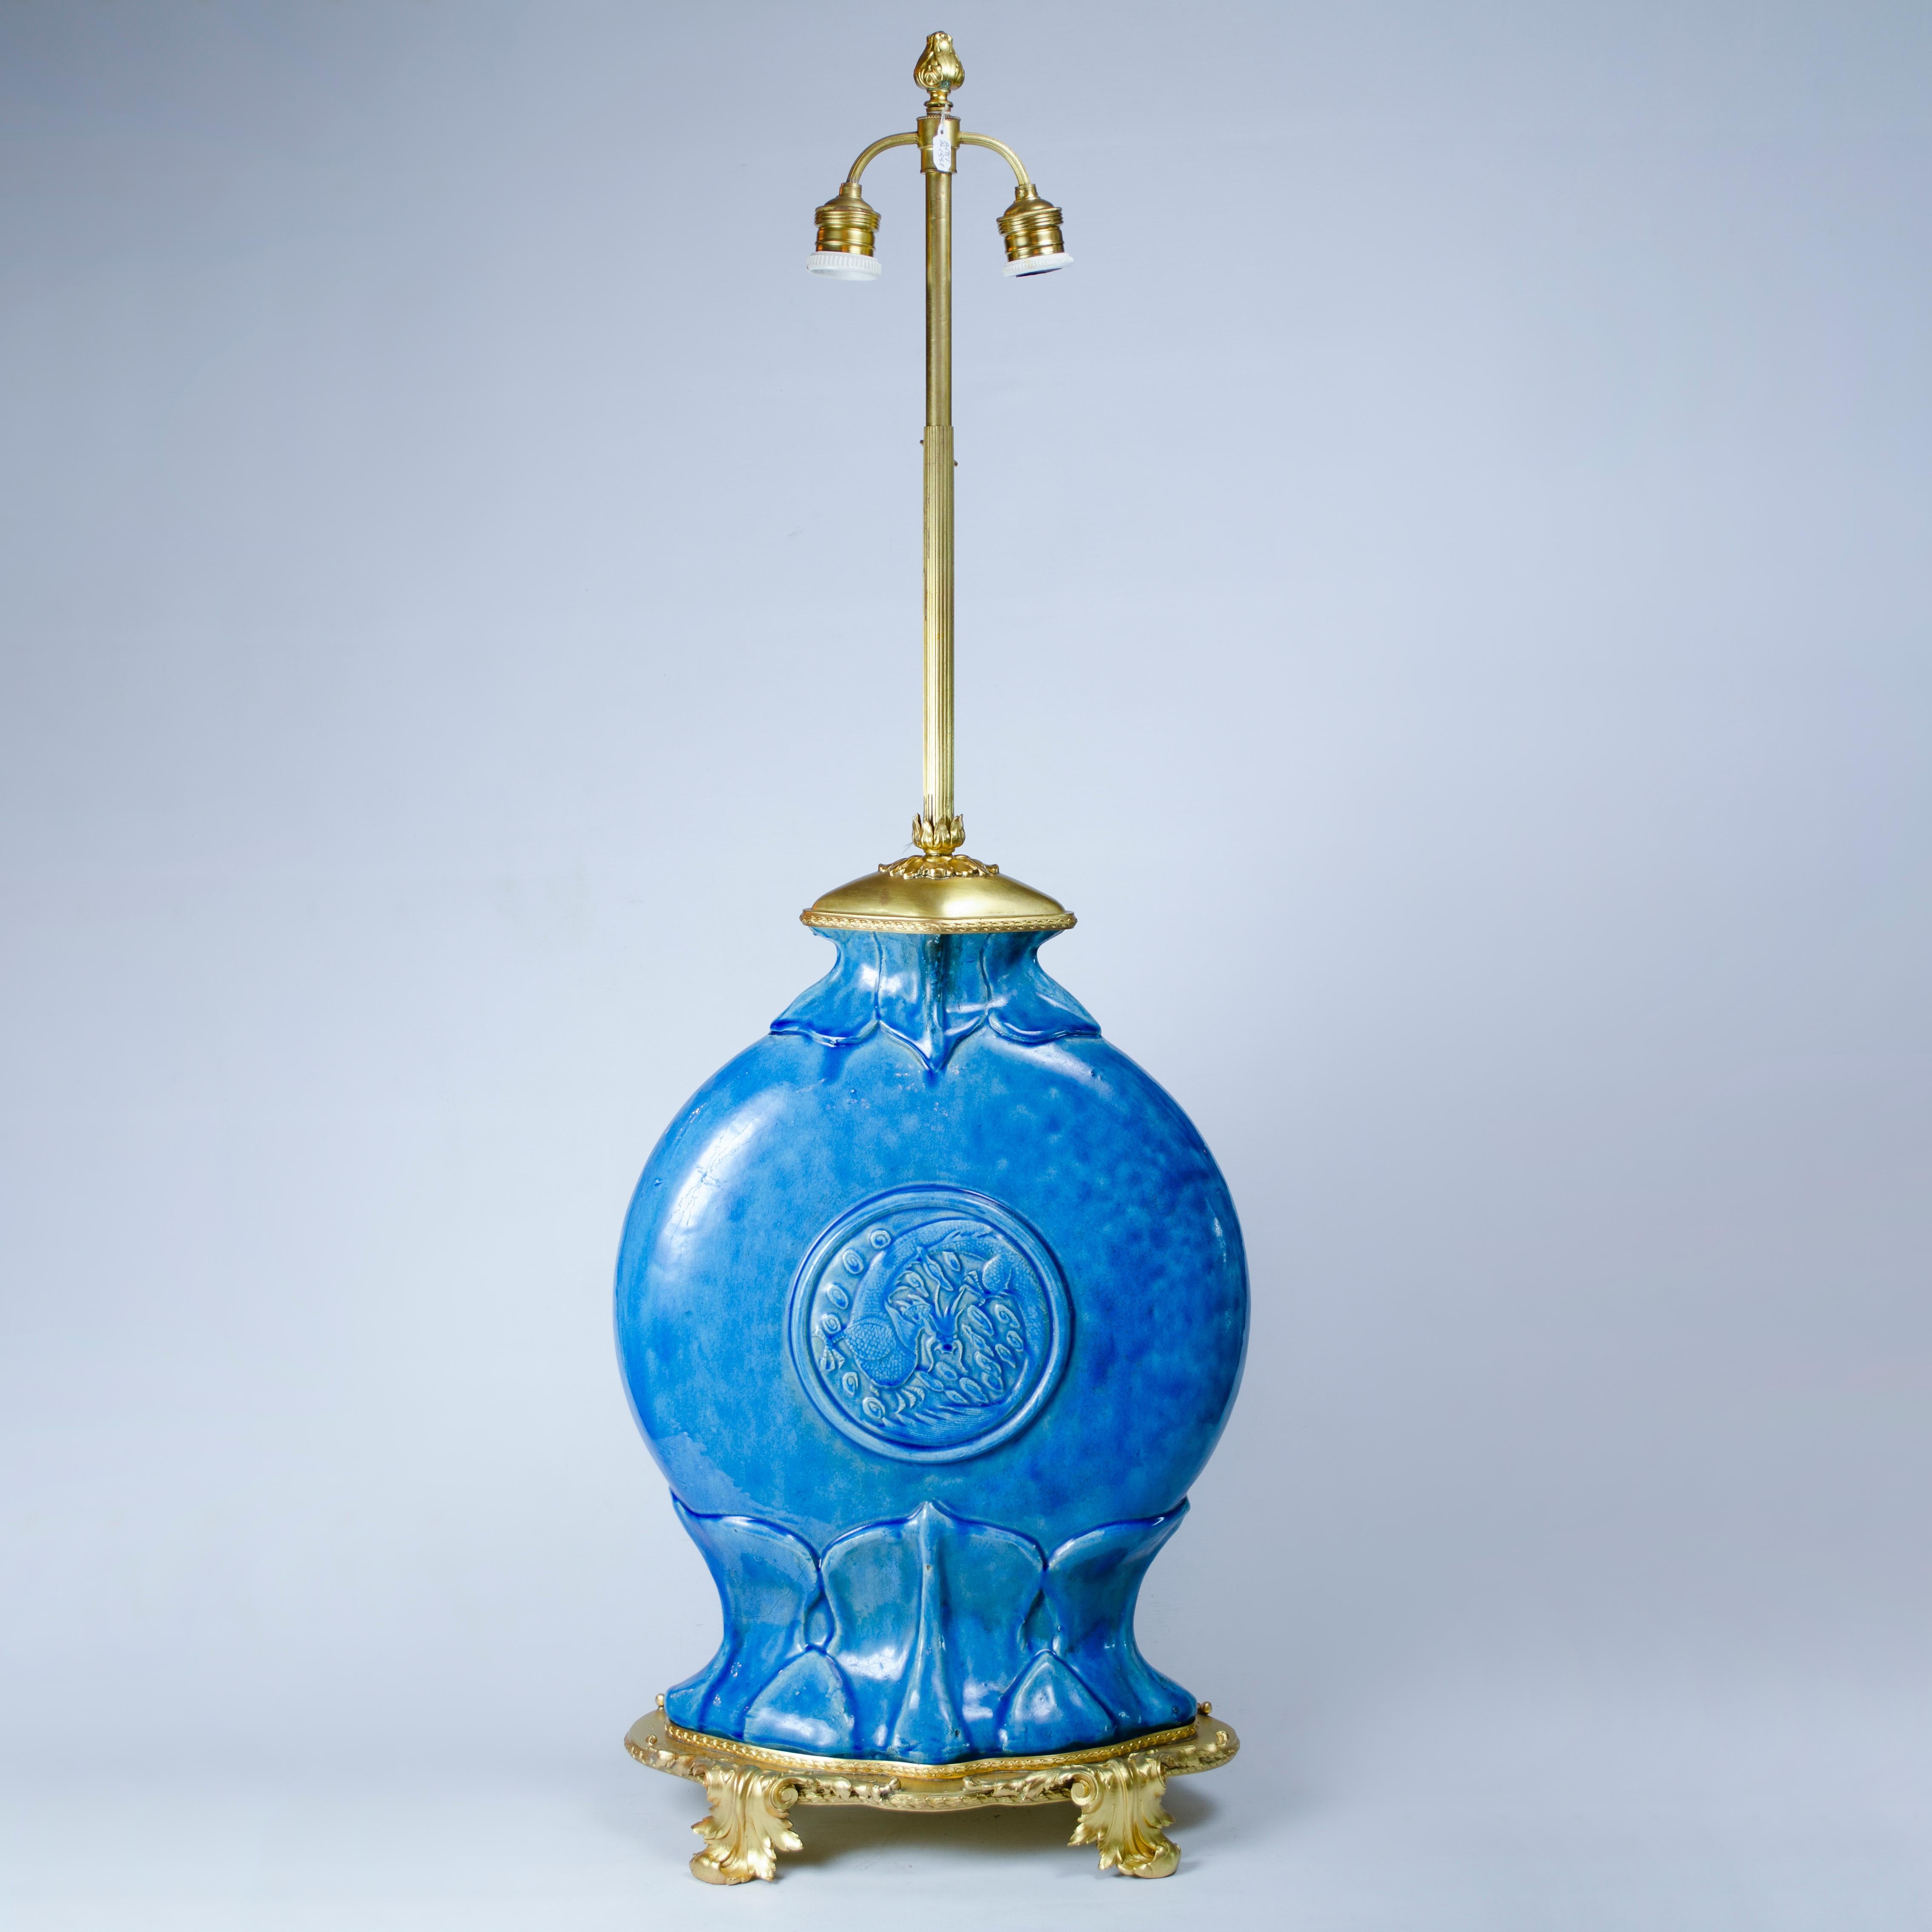 Pair of Blue Glaze ceramic table lamps, with bronze base and stem, made by Theodore Deck (1823-1891). Signed HT DECK, MADE IN FRANCE, France,

France, CIRCA 1880.